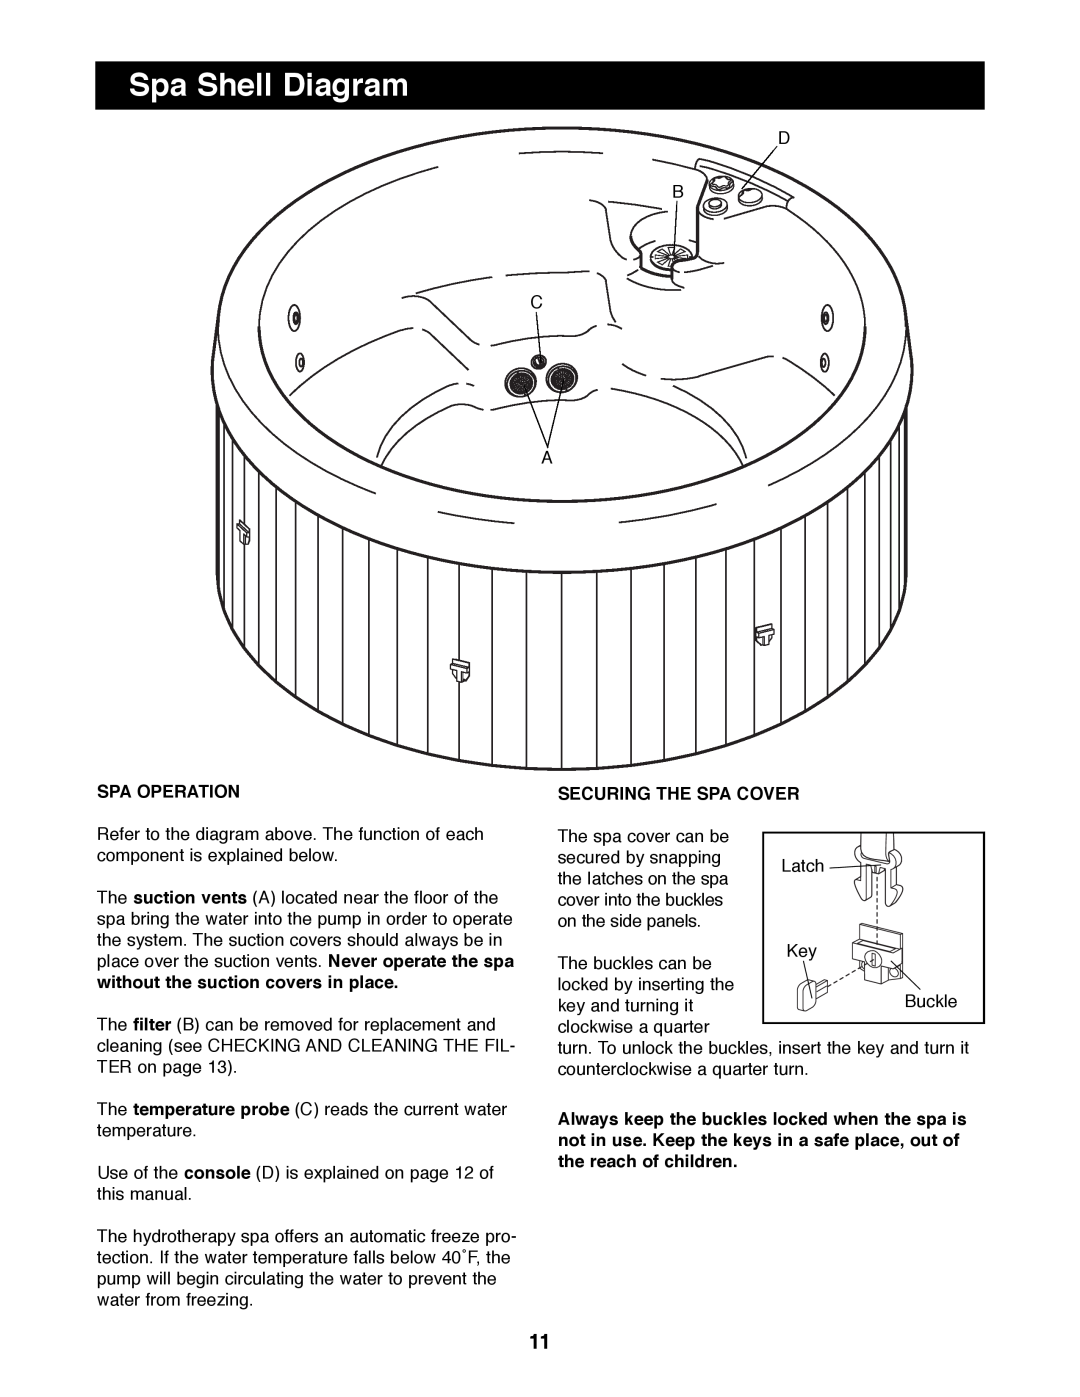 Weslo WLHS43081 manual Spa Shell Diagram, Spa Operation, Securing The Spa Cover, without the suction covers in place 